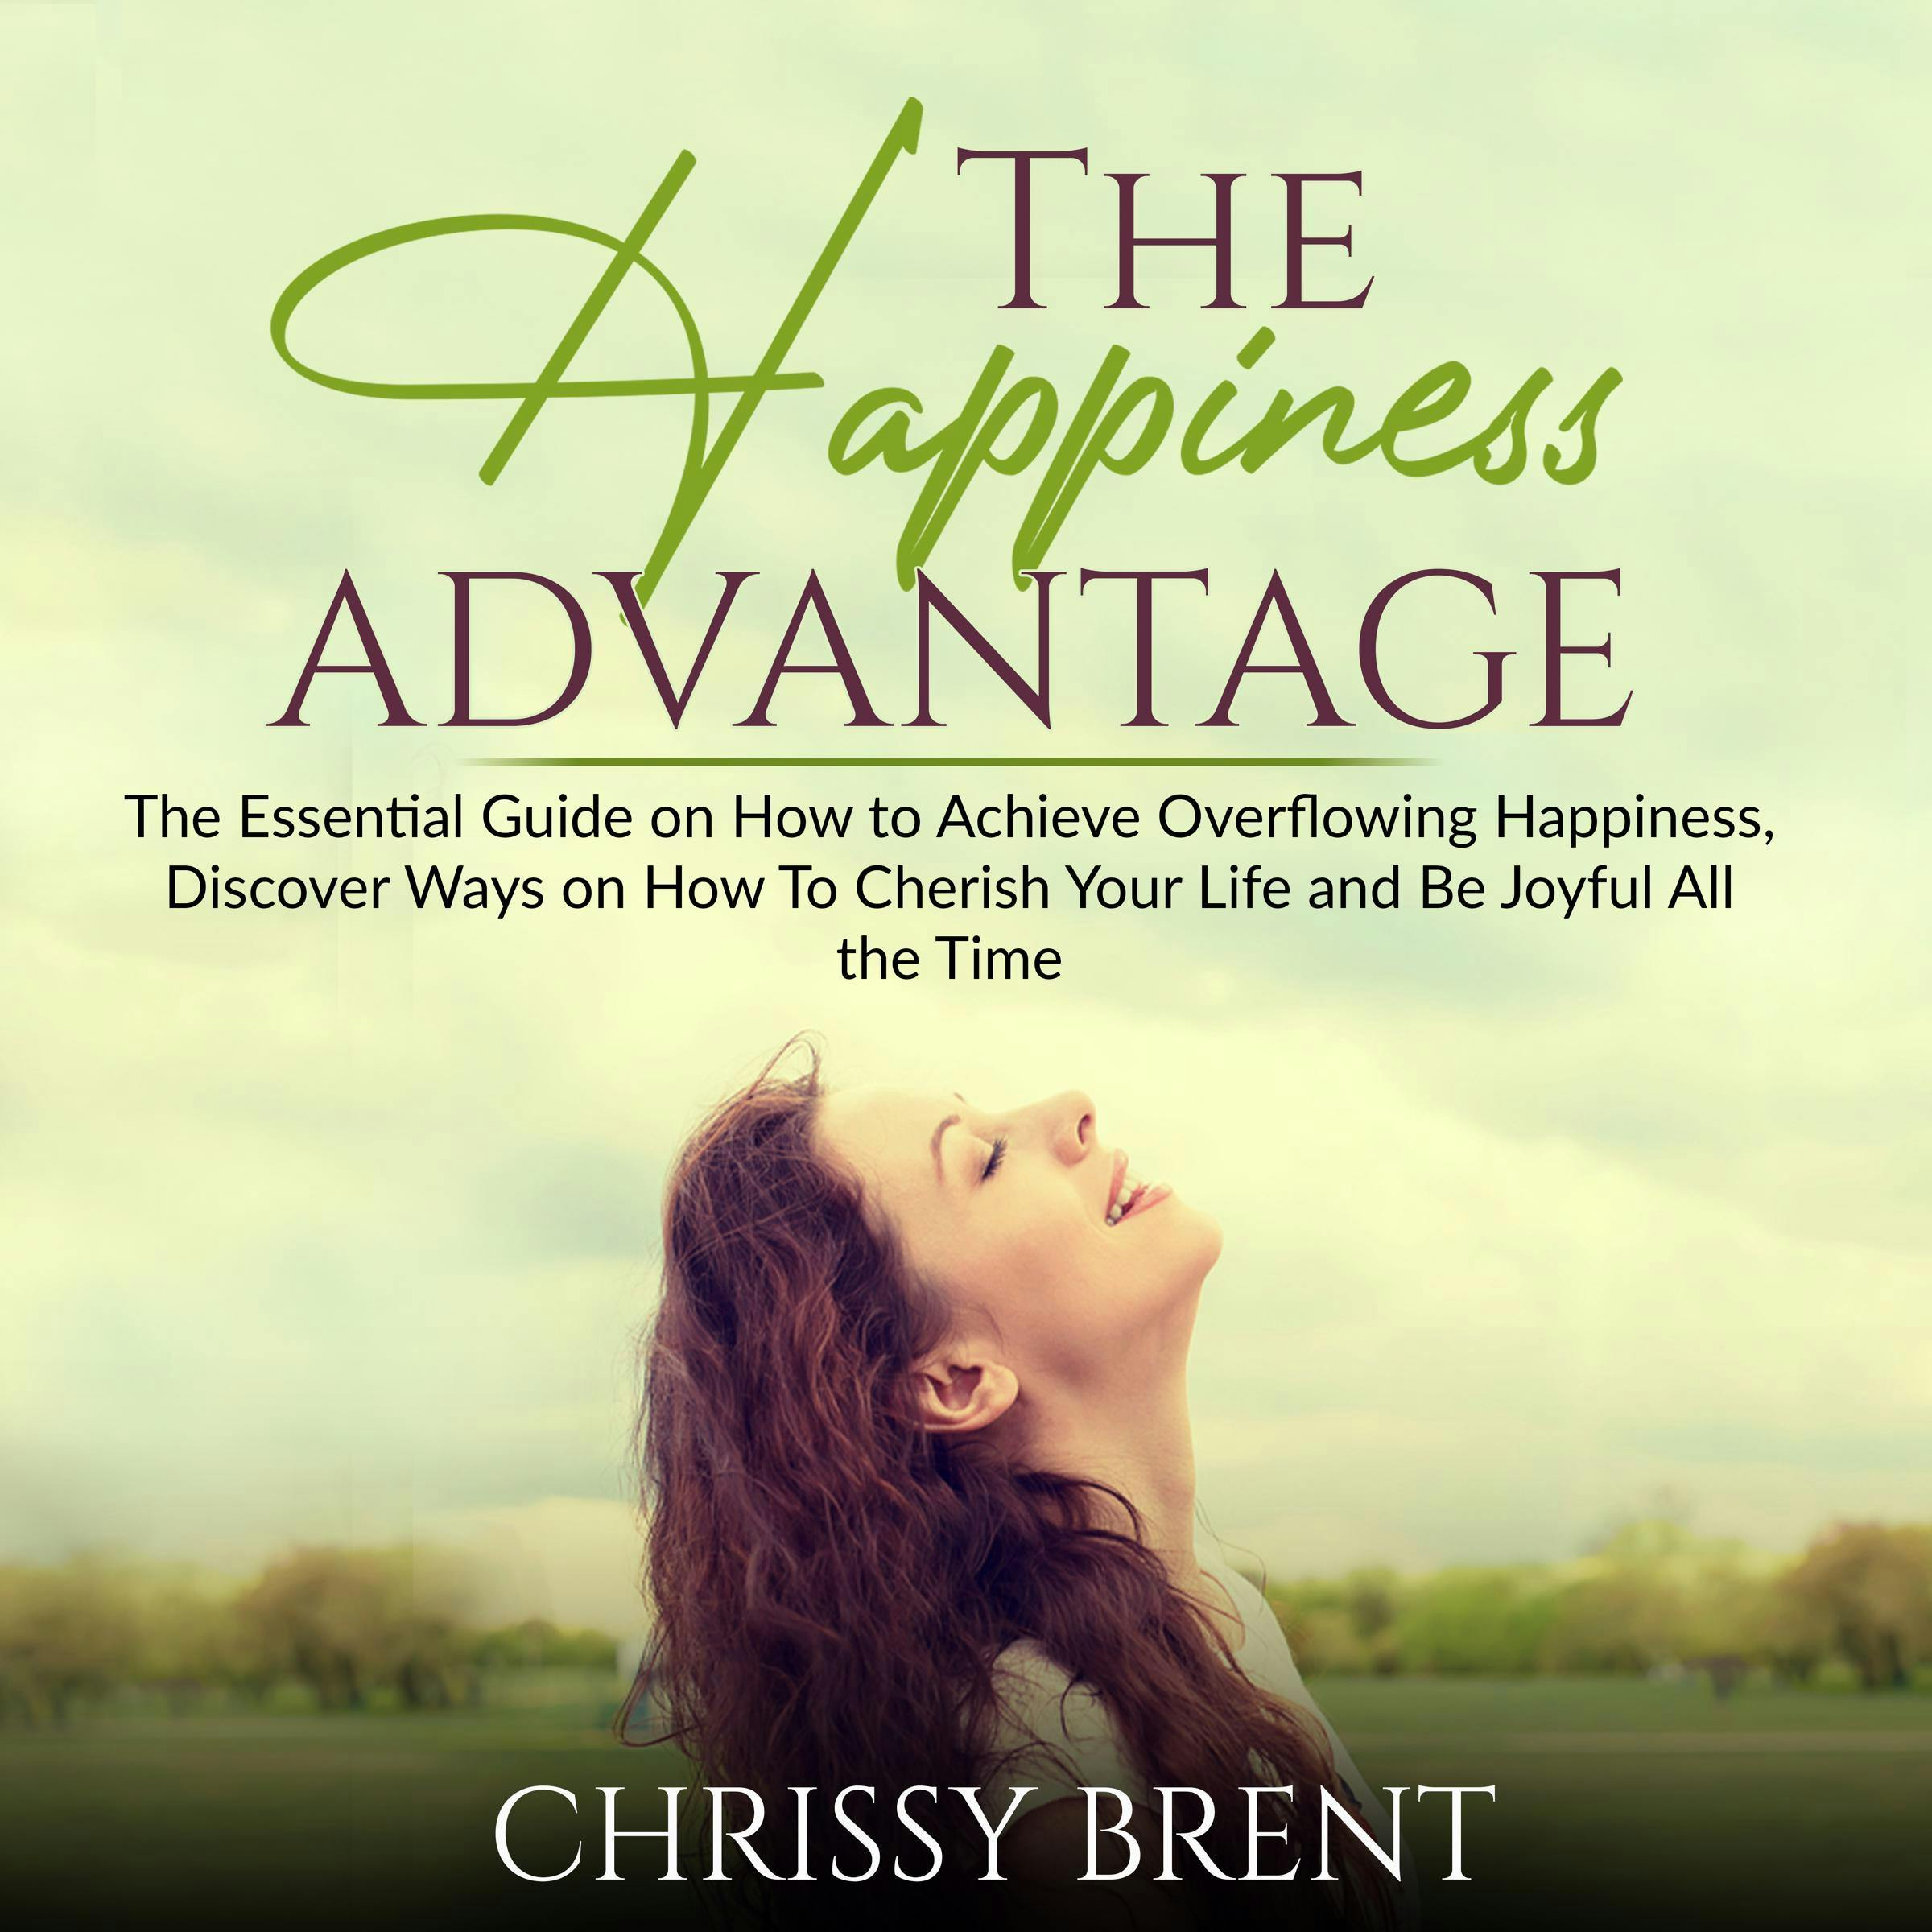 The Happiness Advantage: The Essential Guide on How to Achieve Overflowing Happiness, Discover Ways on How To Cherish Your Life and Be Joyful All the Time - undefined